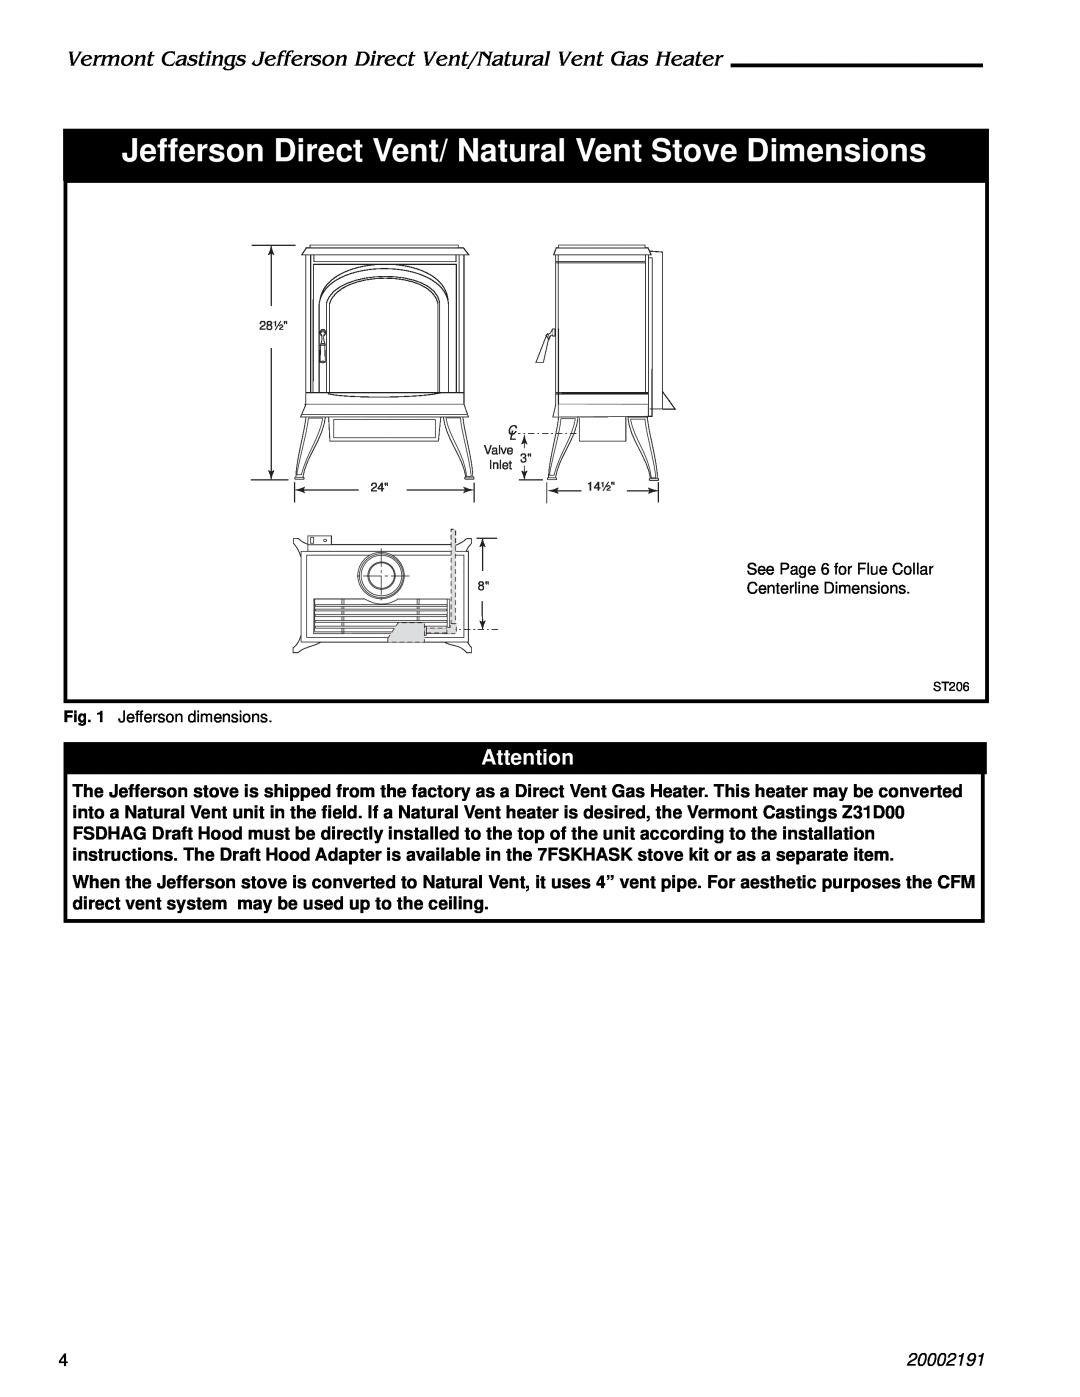 Vermont Casting 2827, 820, 2828 20002191, See Page 6 for Flue Collar Centerline Dimensions, Jefferson dimensions, ST206 